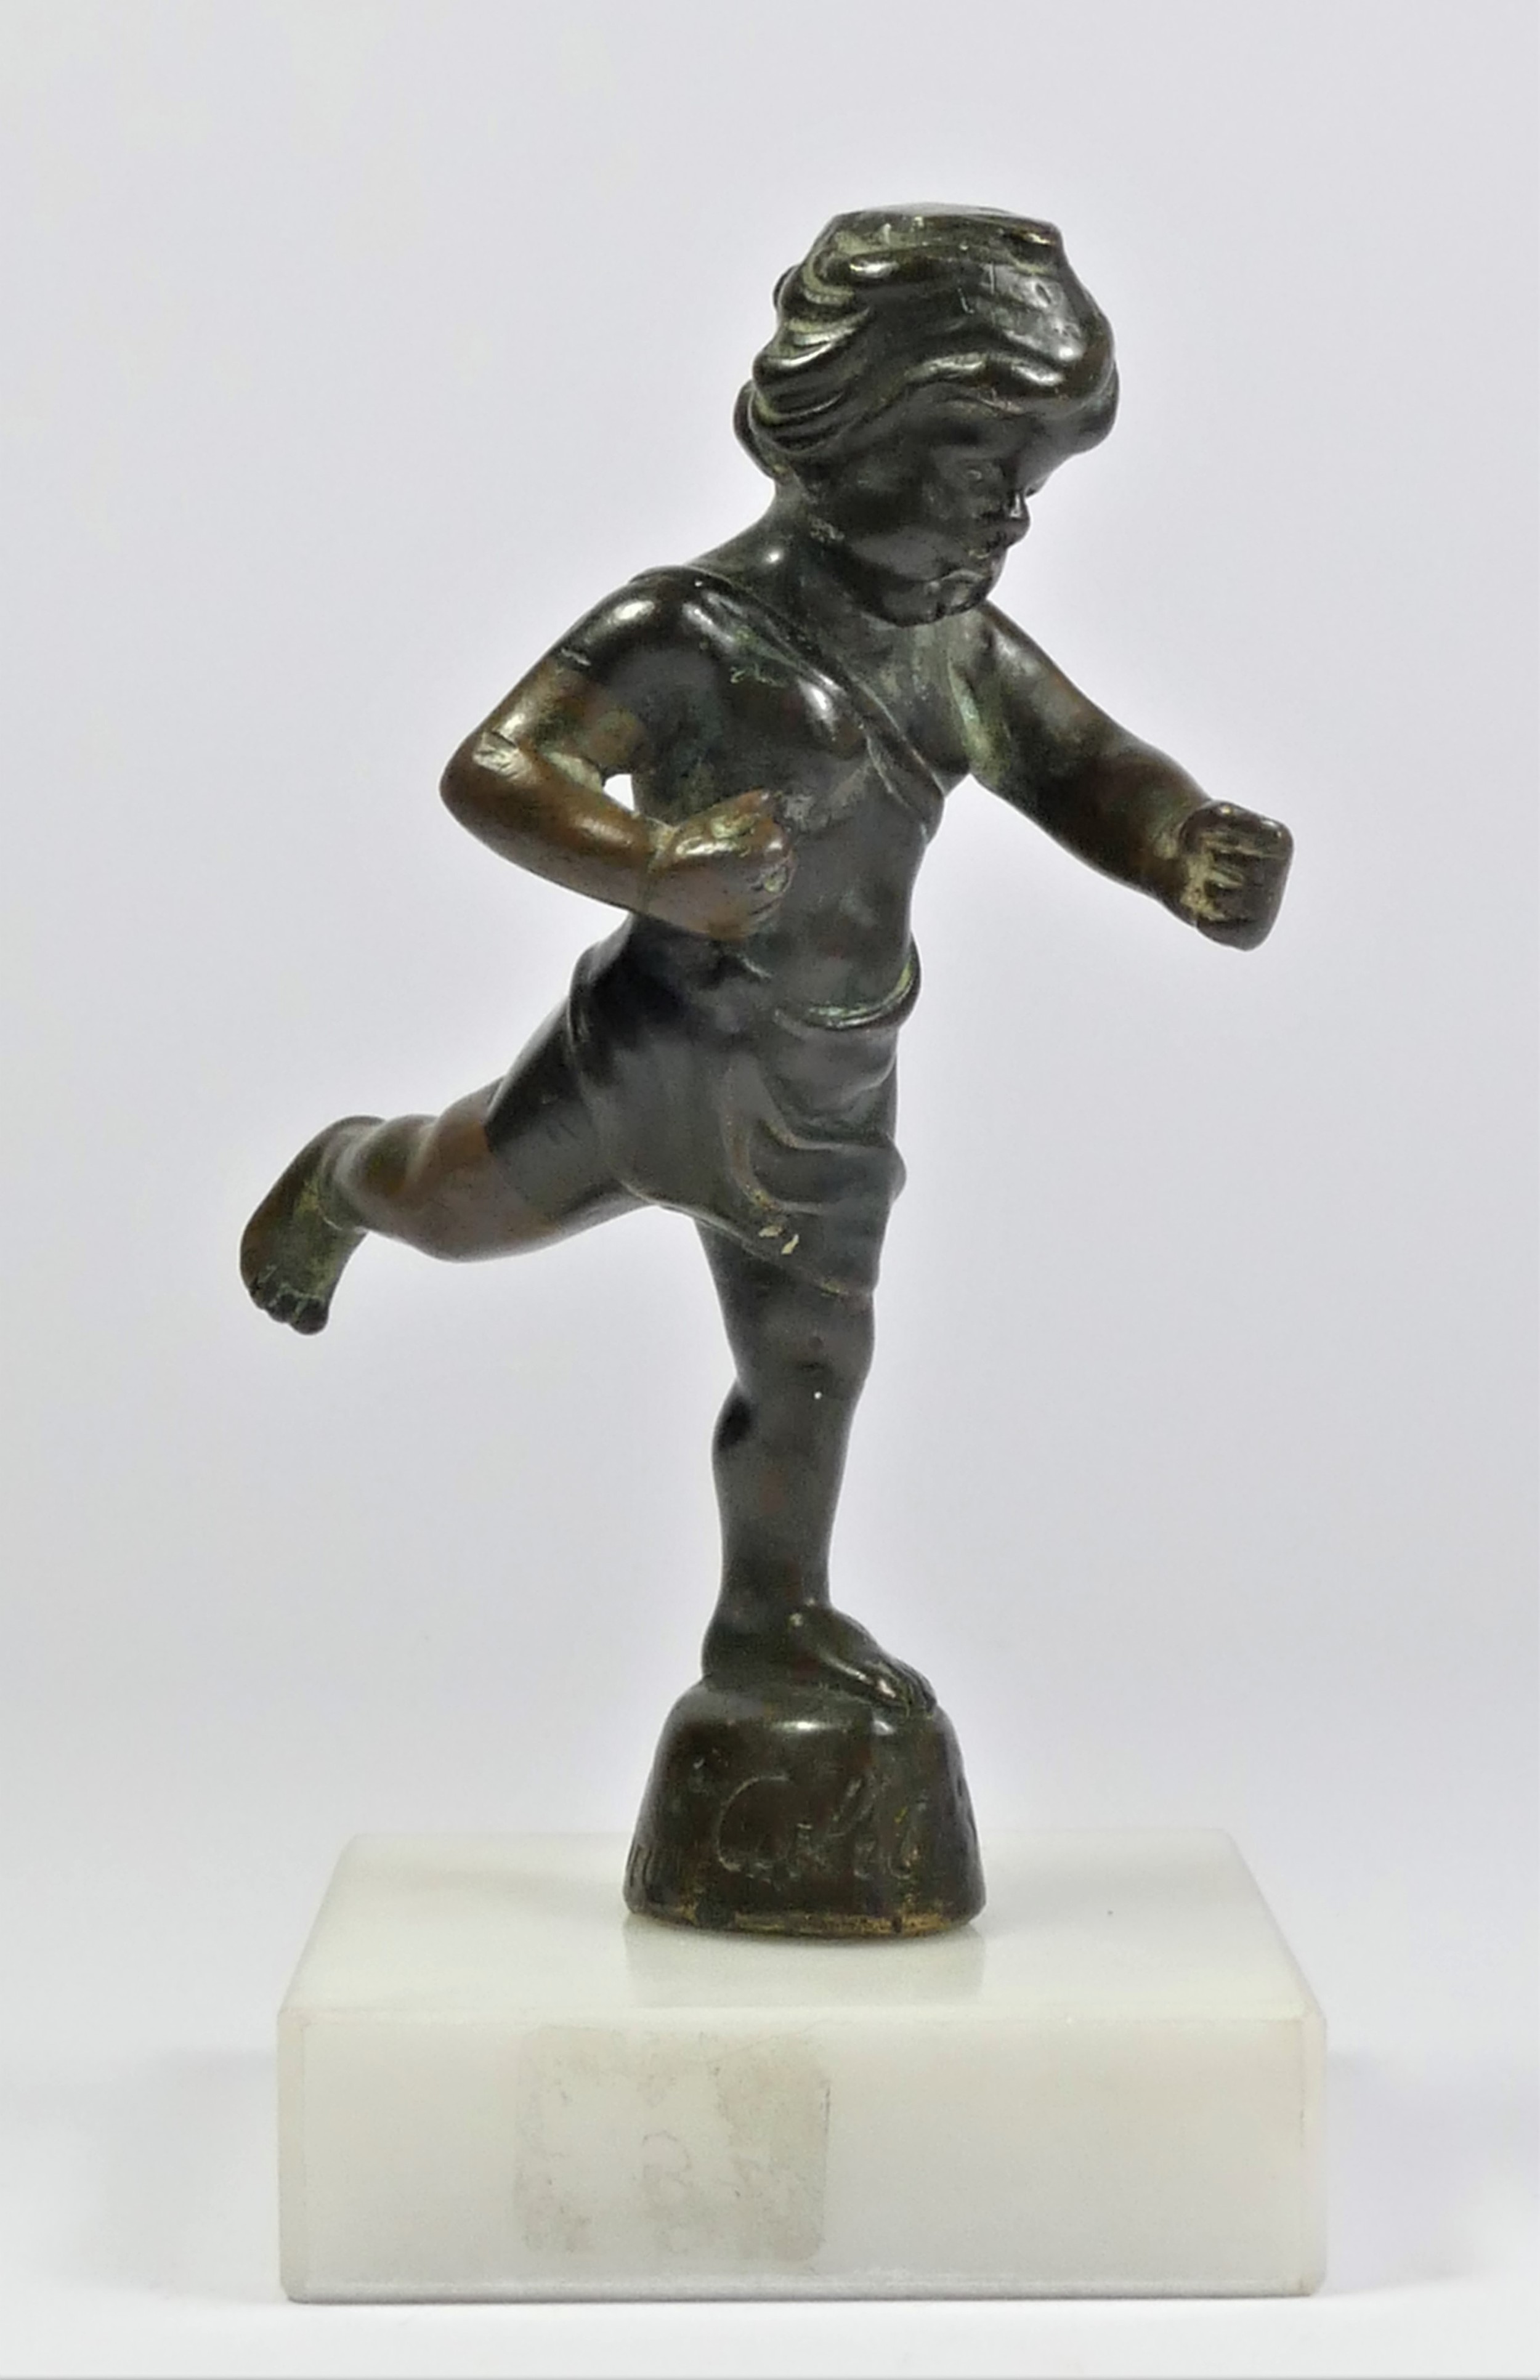 A bronze cherub car mascot signed Cubitt Cupid by Emile Lejeune, mounted on a white marble base,